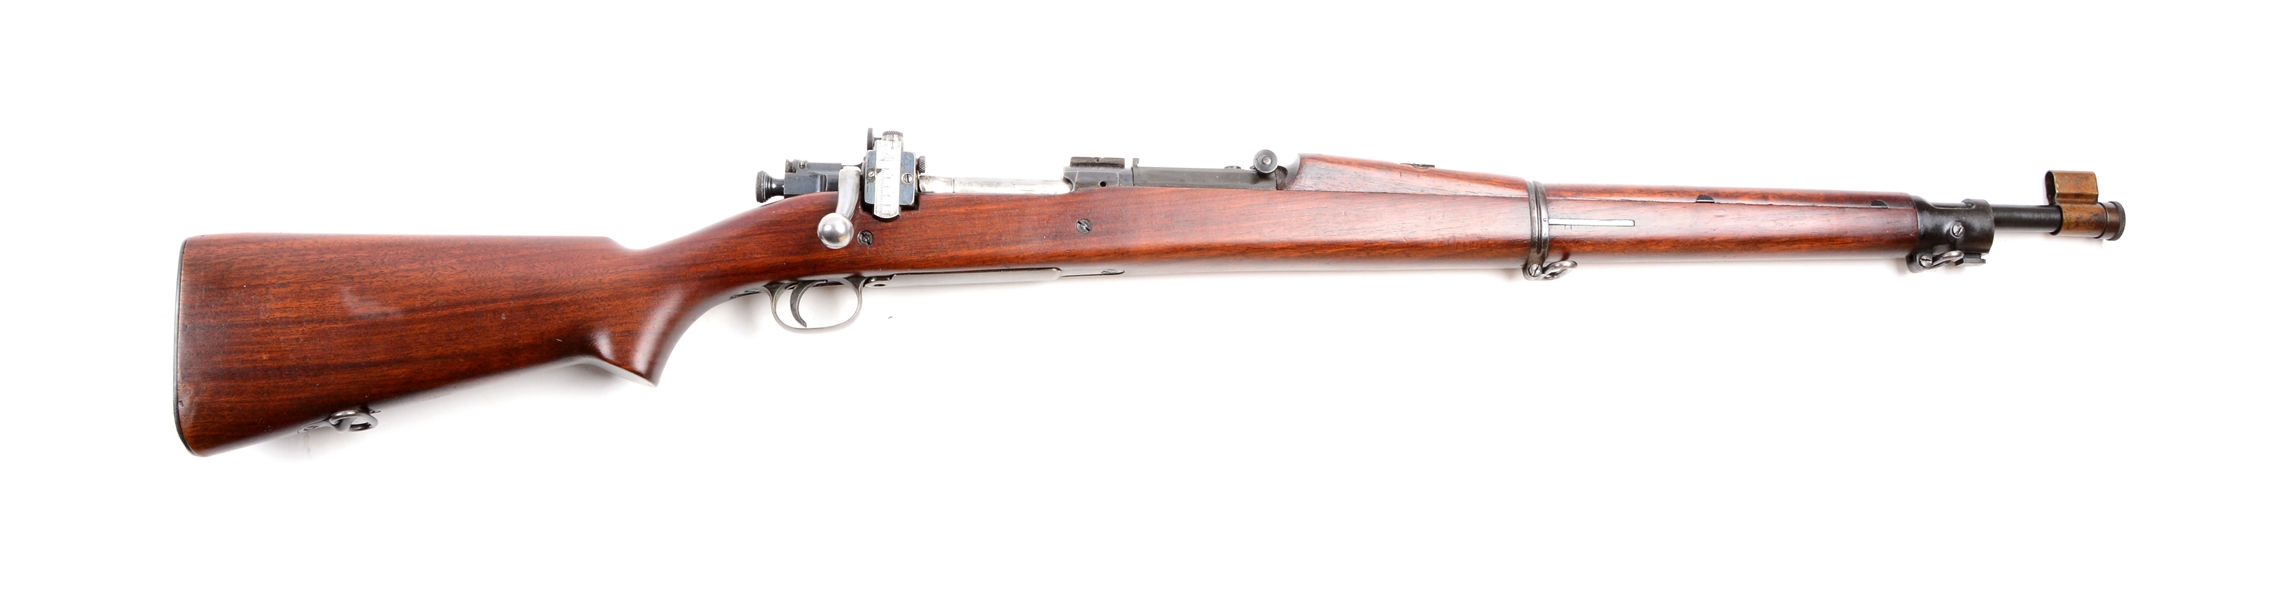 (C) U.S. SPRINGFIELD MODEL 1903 NATIONAL MATCH STYLE BOLT ACTION RIFLE.